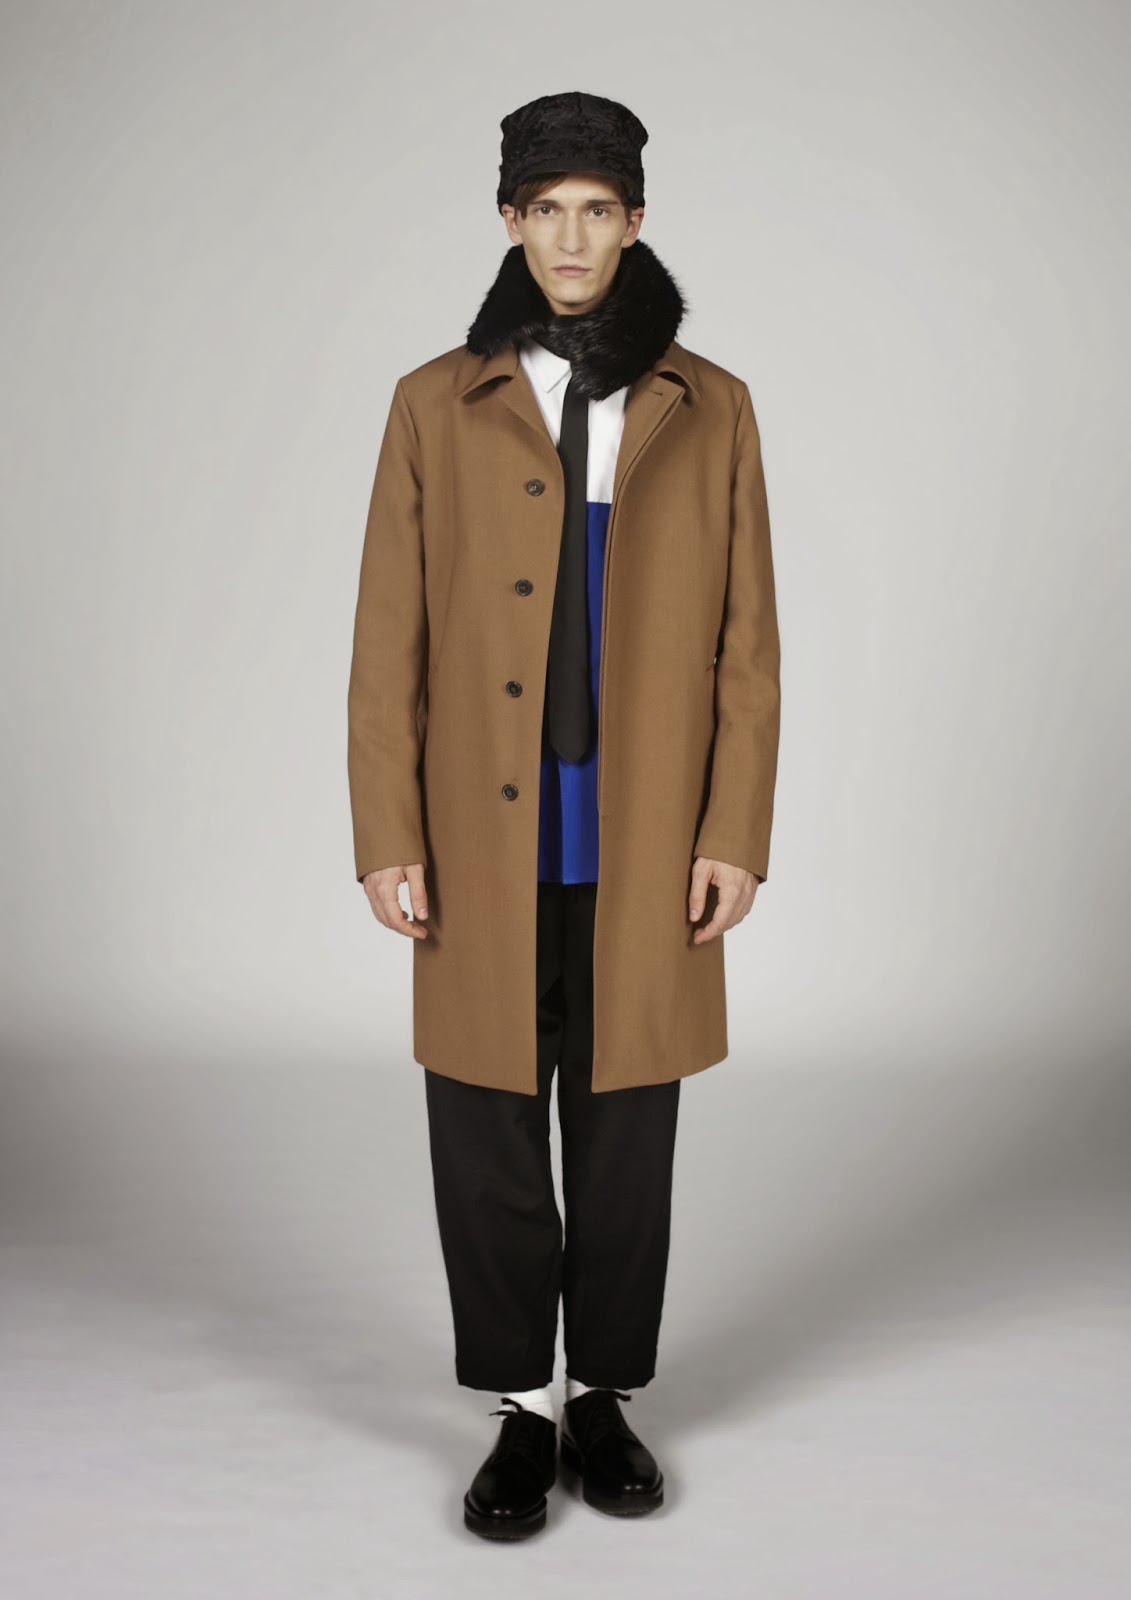 DIARY OF A CLOTHESHORSE: MARNI MEN'S F/W 2014-2015 COLLECTION